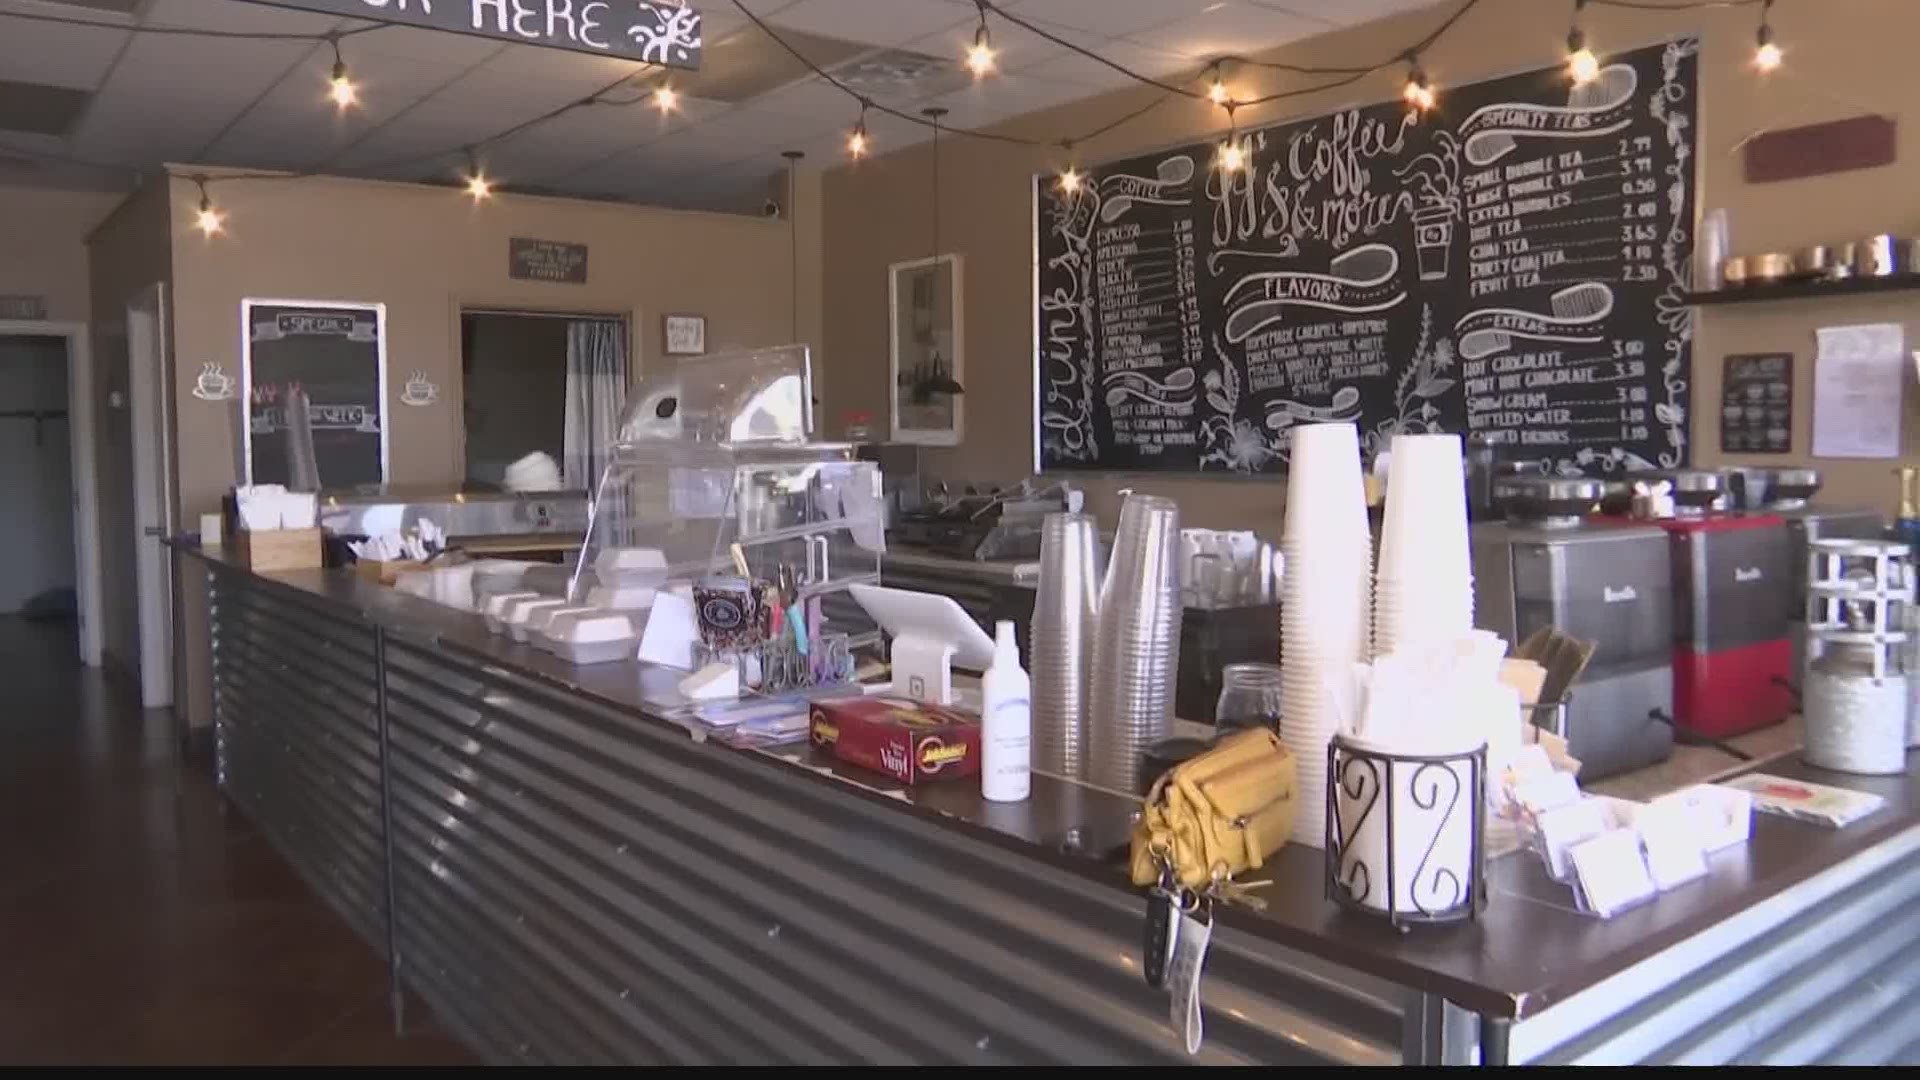 Tennessee restaurants have been given the green light to let customers back inside.